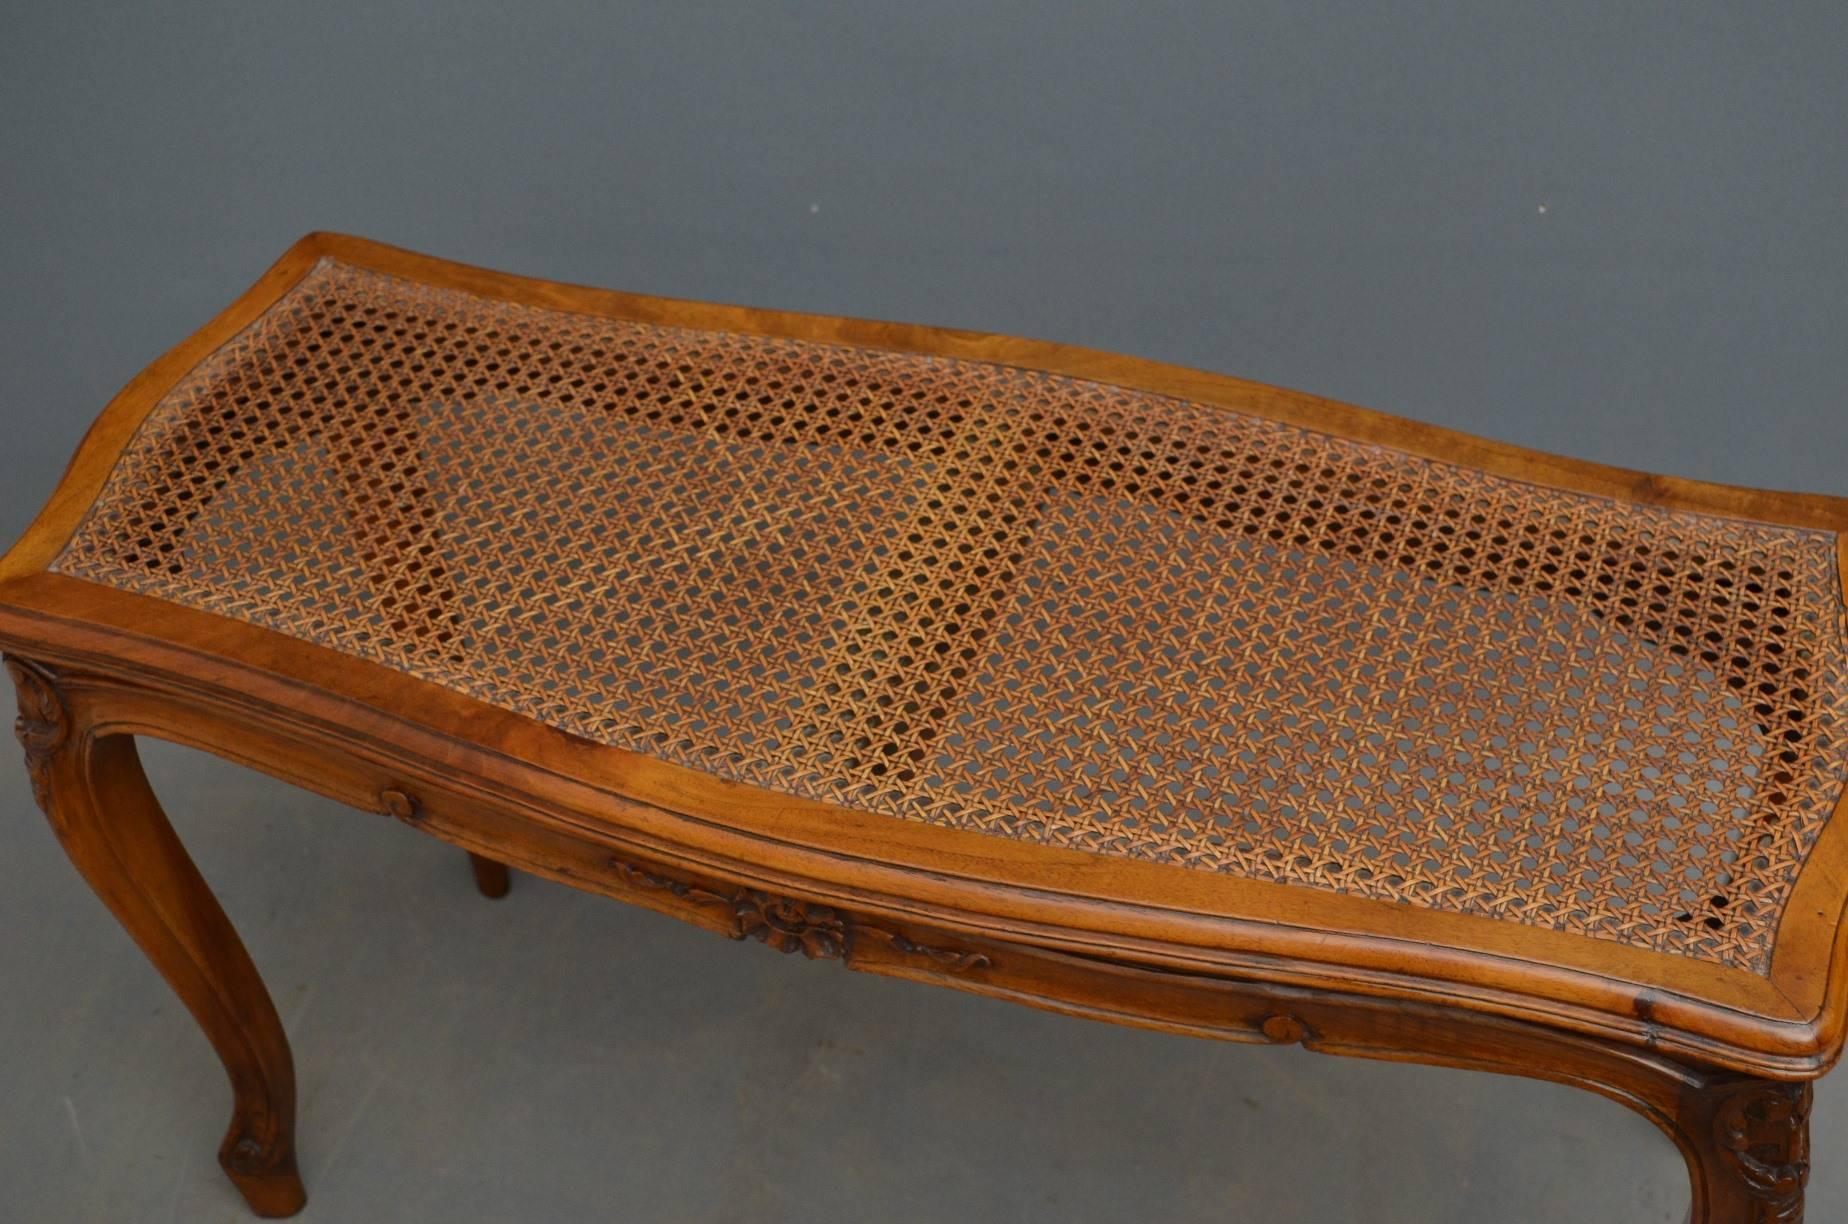 Sn3803 Attractive French walnut window seat /bench with original caned seat, carved front and back rails and cabriole legs, all in excellent condition, ready to place at home, circa 1890
Measures: H 20